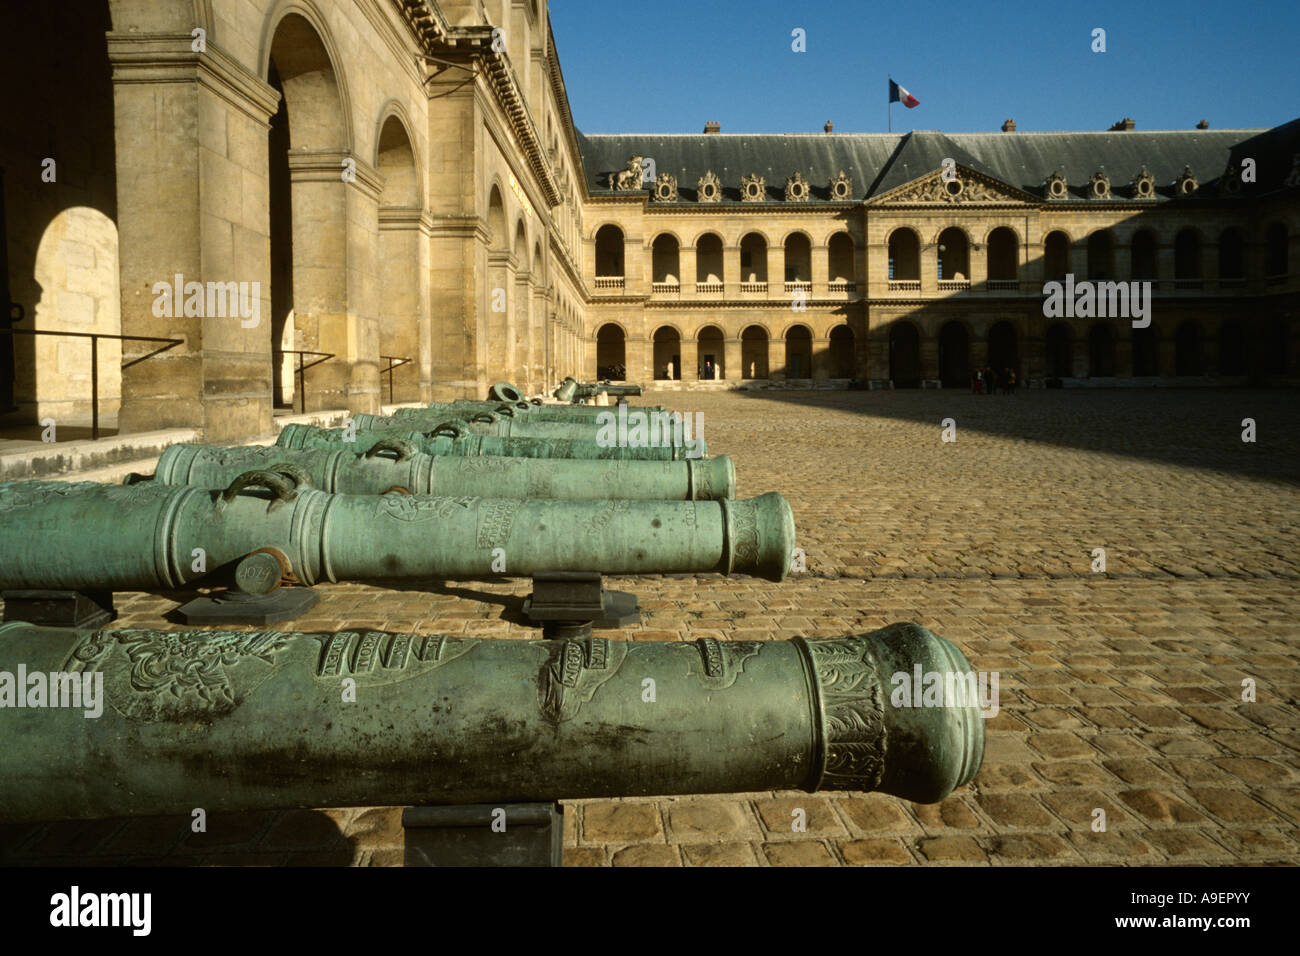 Paris France Canons on display at Les Invalides former military hospital now houses the Musee de l Armee Stock Photo